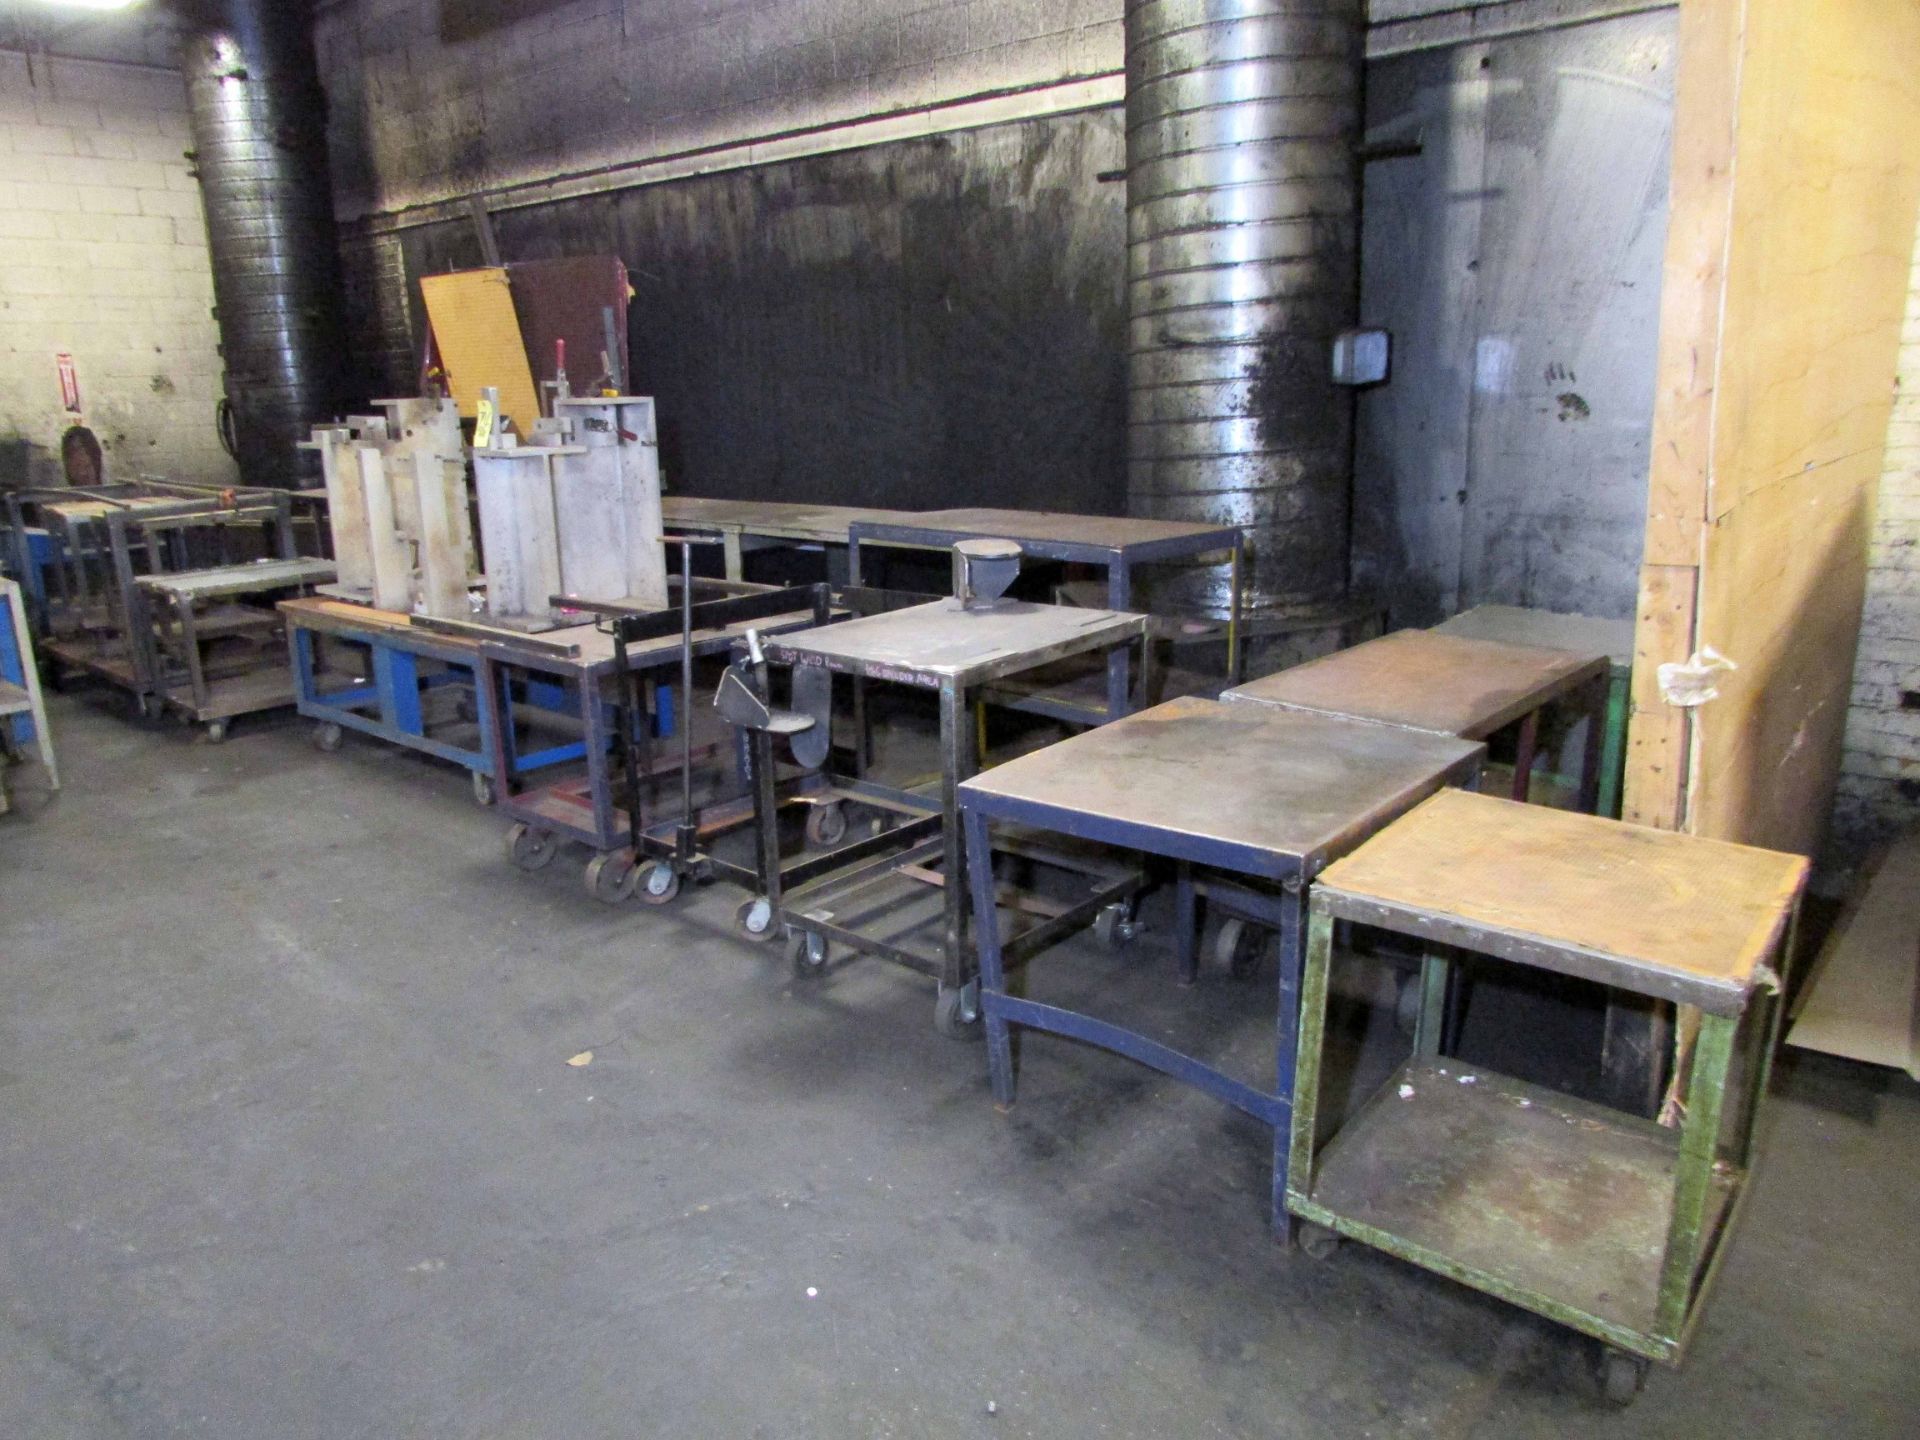 LOT CONSISTING OF: steel shop carts & workbenches, large assortment